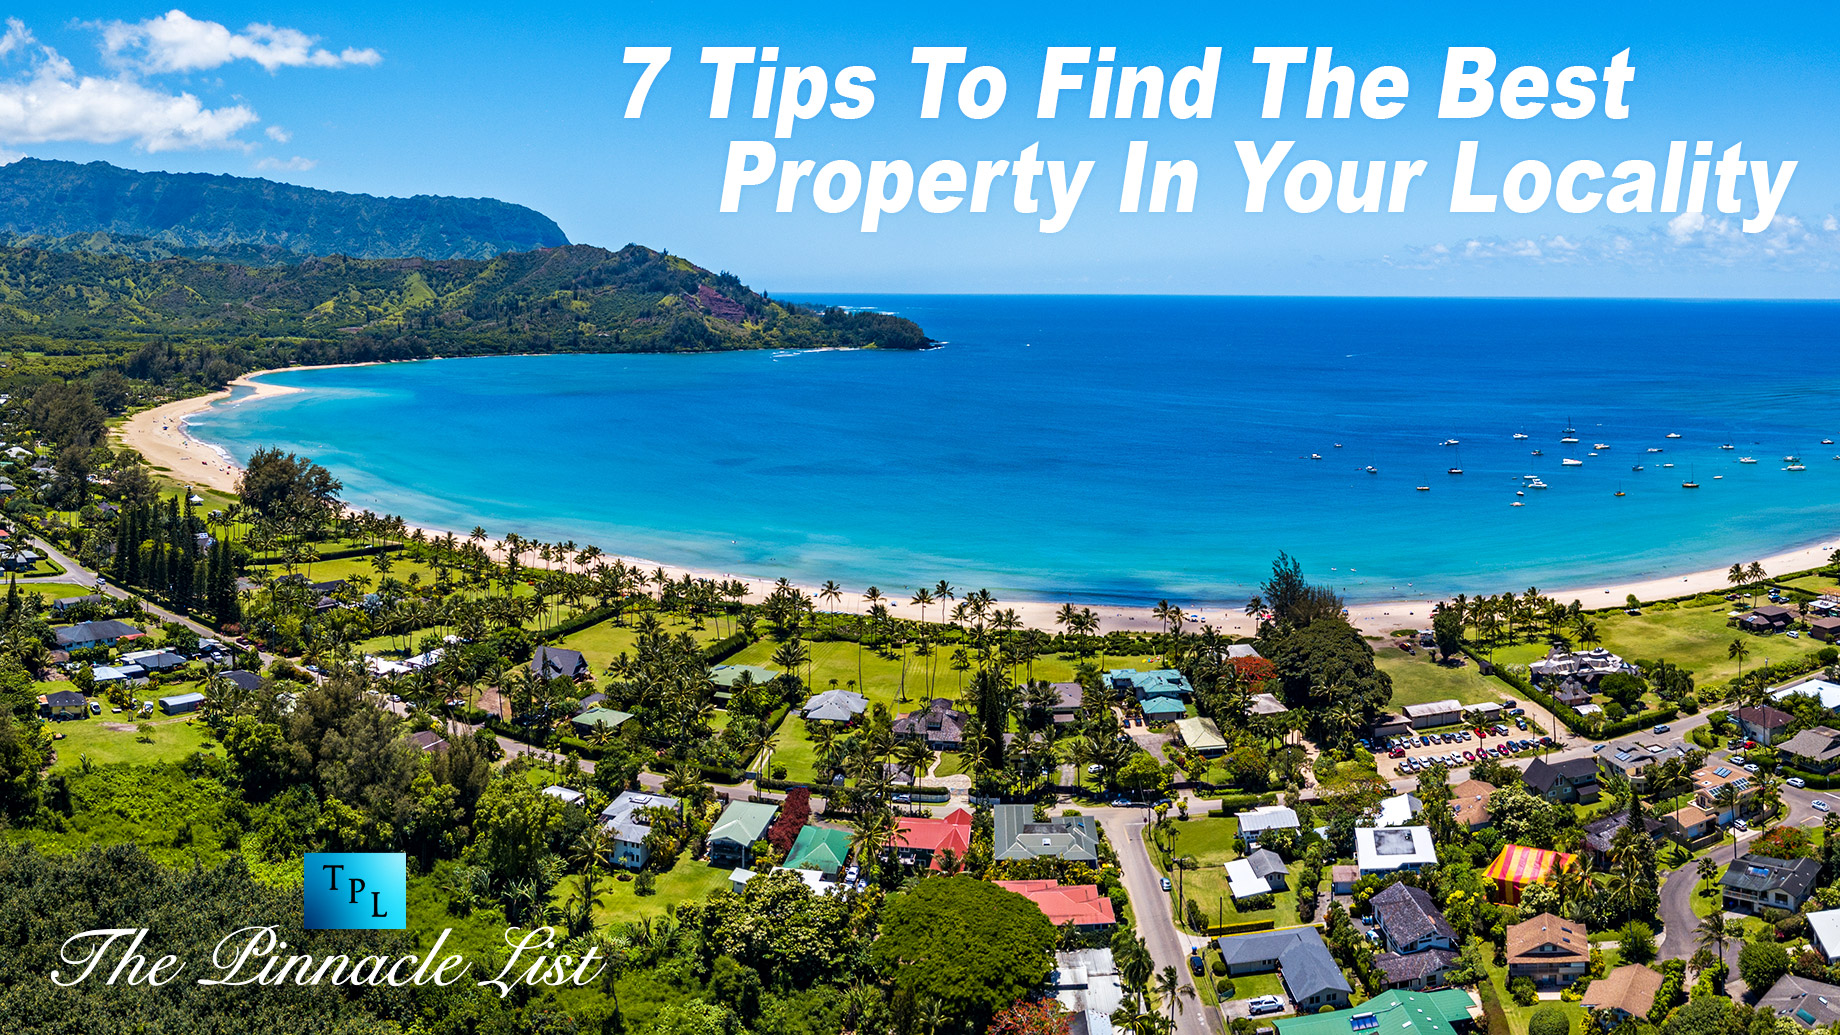 7 Tips To Find The Best Property In Your Locality